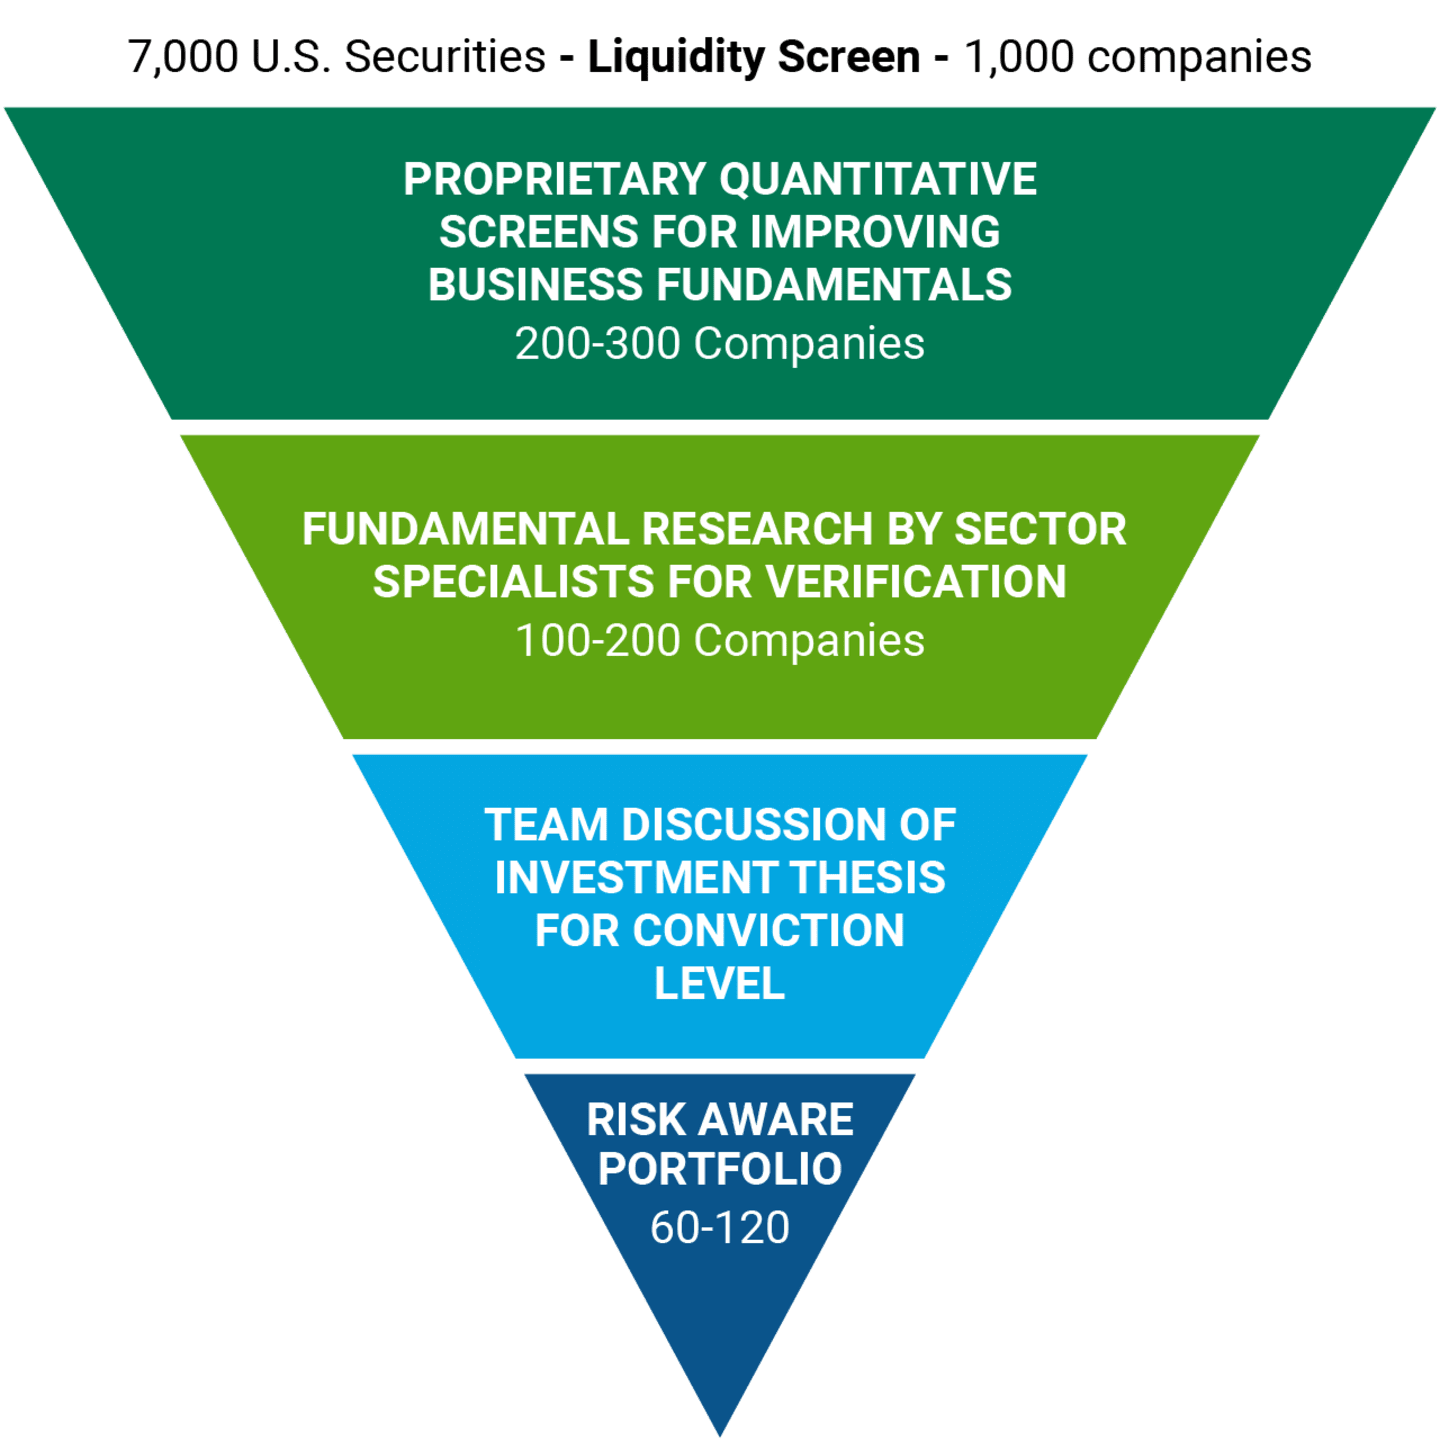 Proprietary quantitative screens for business fundamentals: 200-300 companies. Fundamental research by sector specialists for verification: 100-200 companies. Team discussion of investment thesis for conviction level. Risk aware portfolio: 60-120.